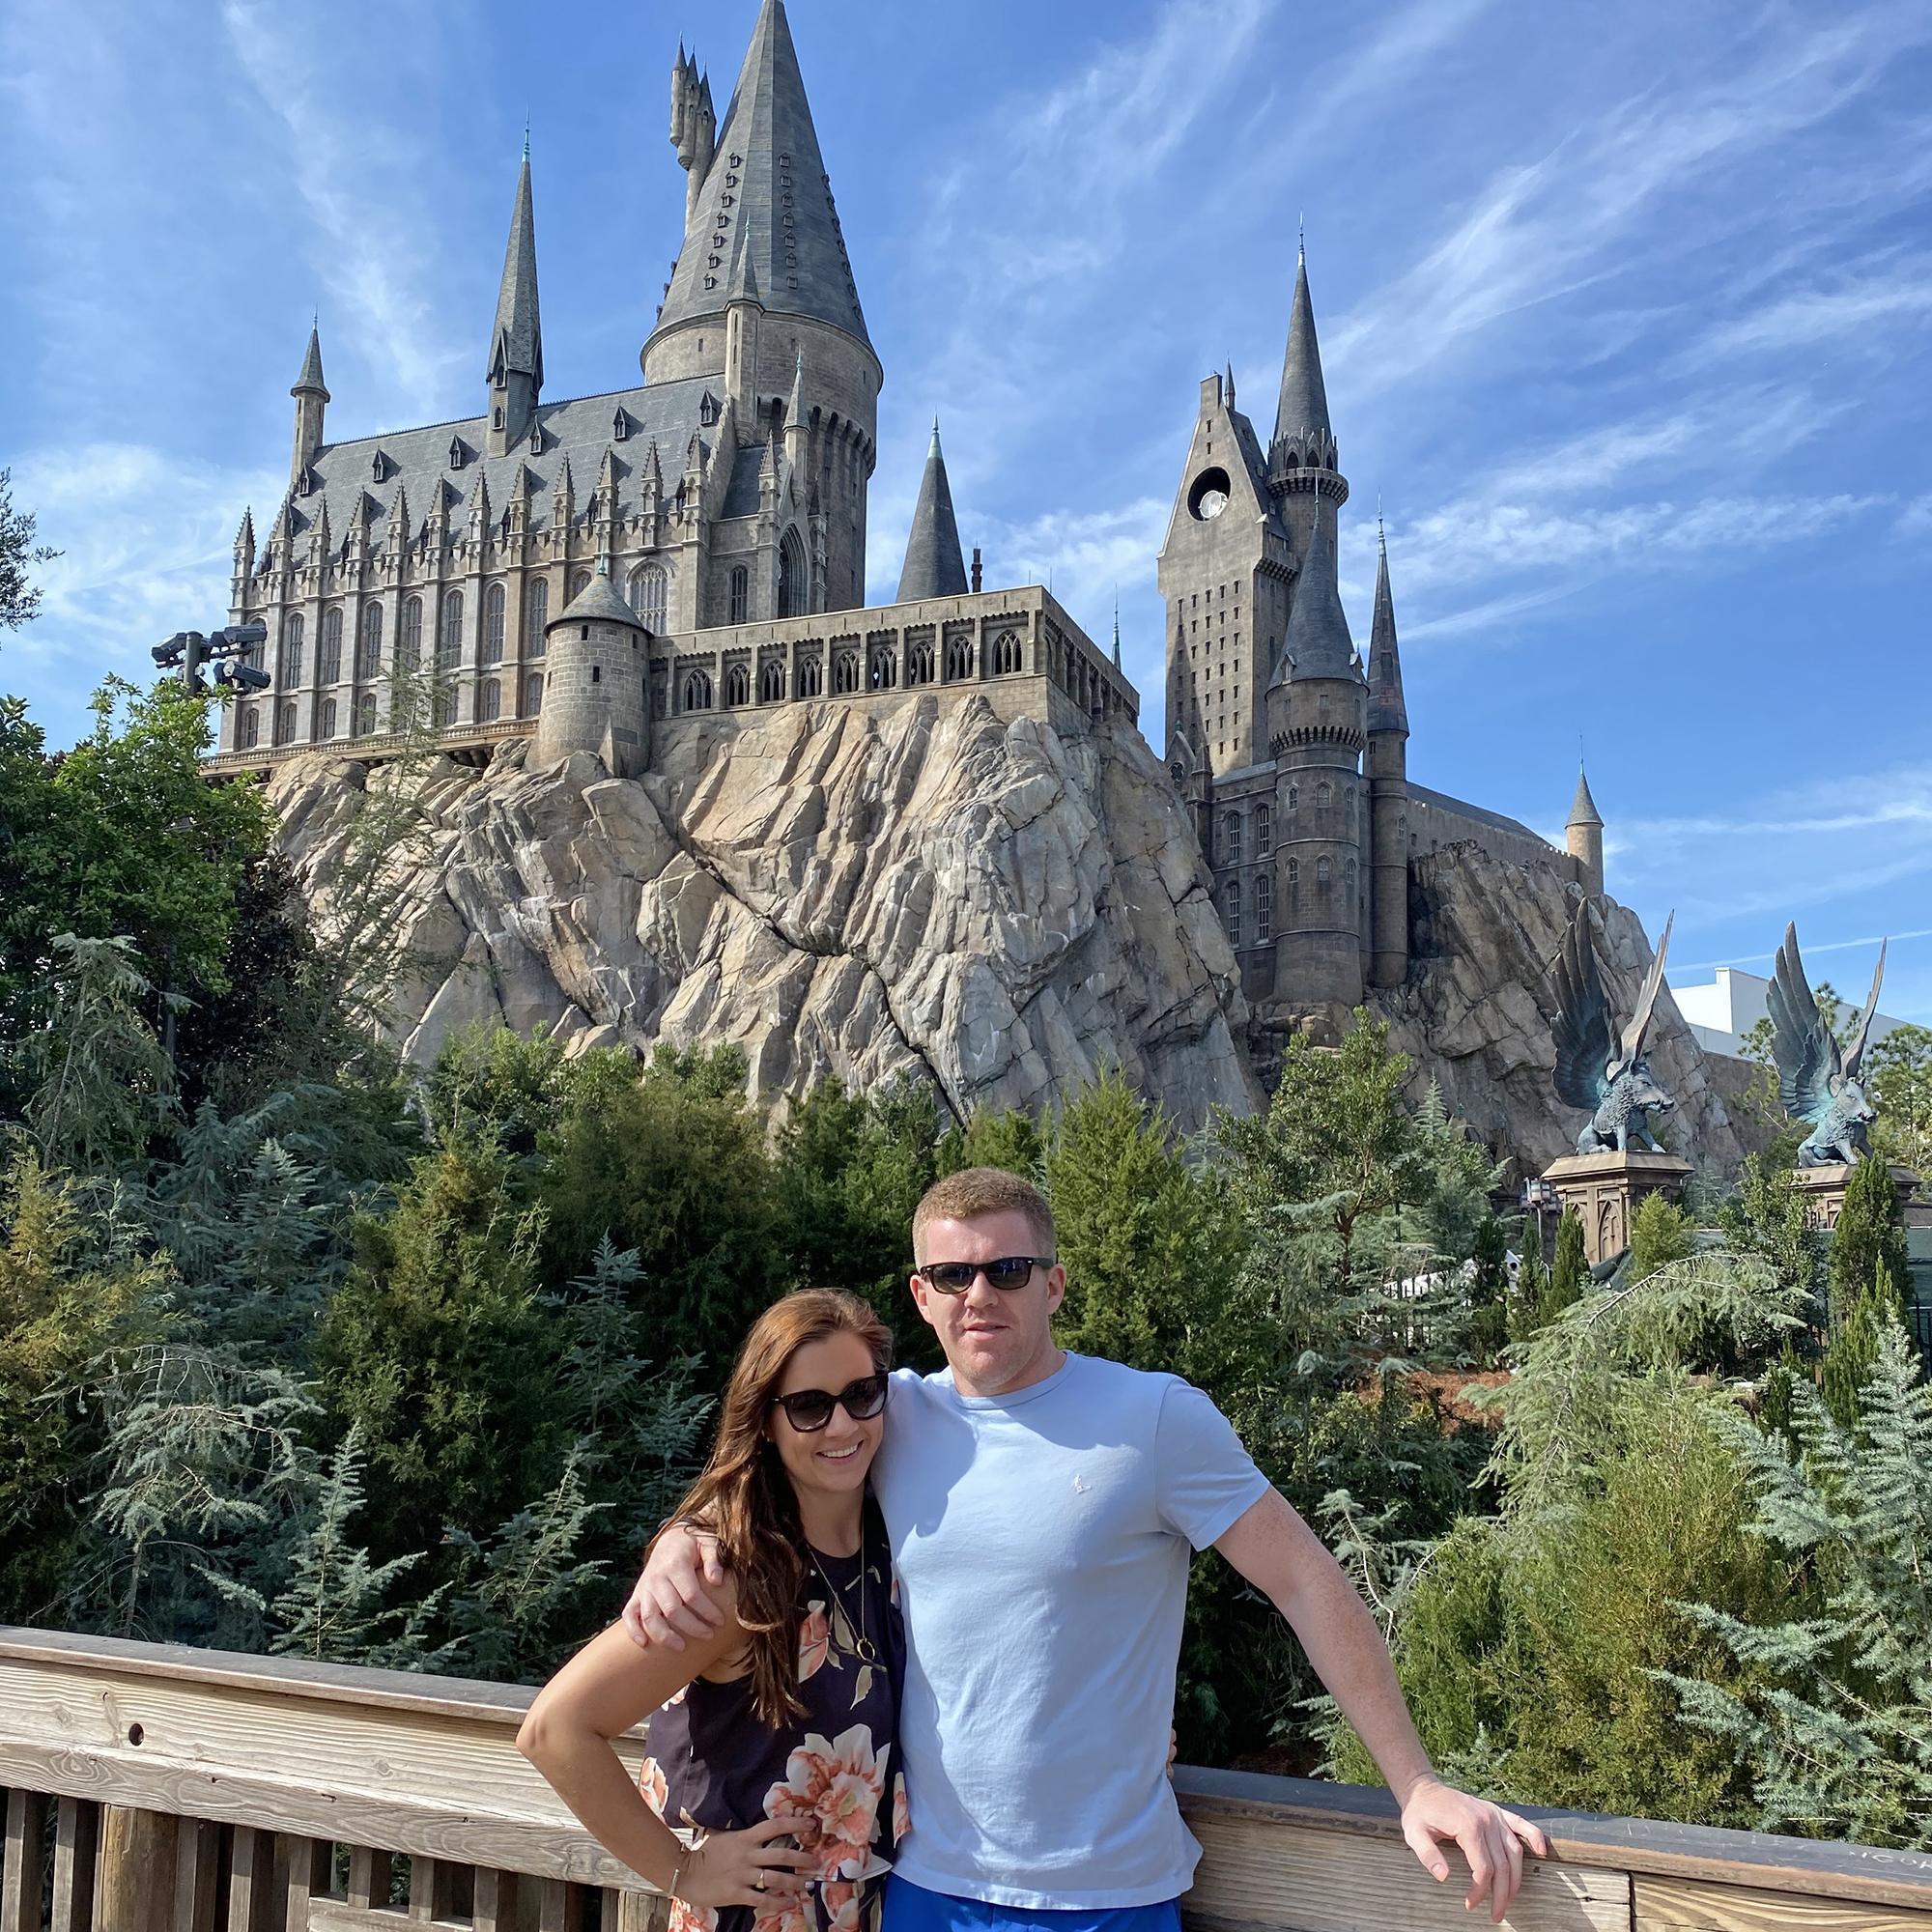 A great day at the The Wizarding World of Harry Potter at Universal Orlando